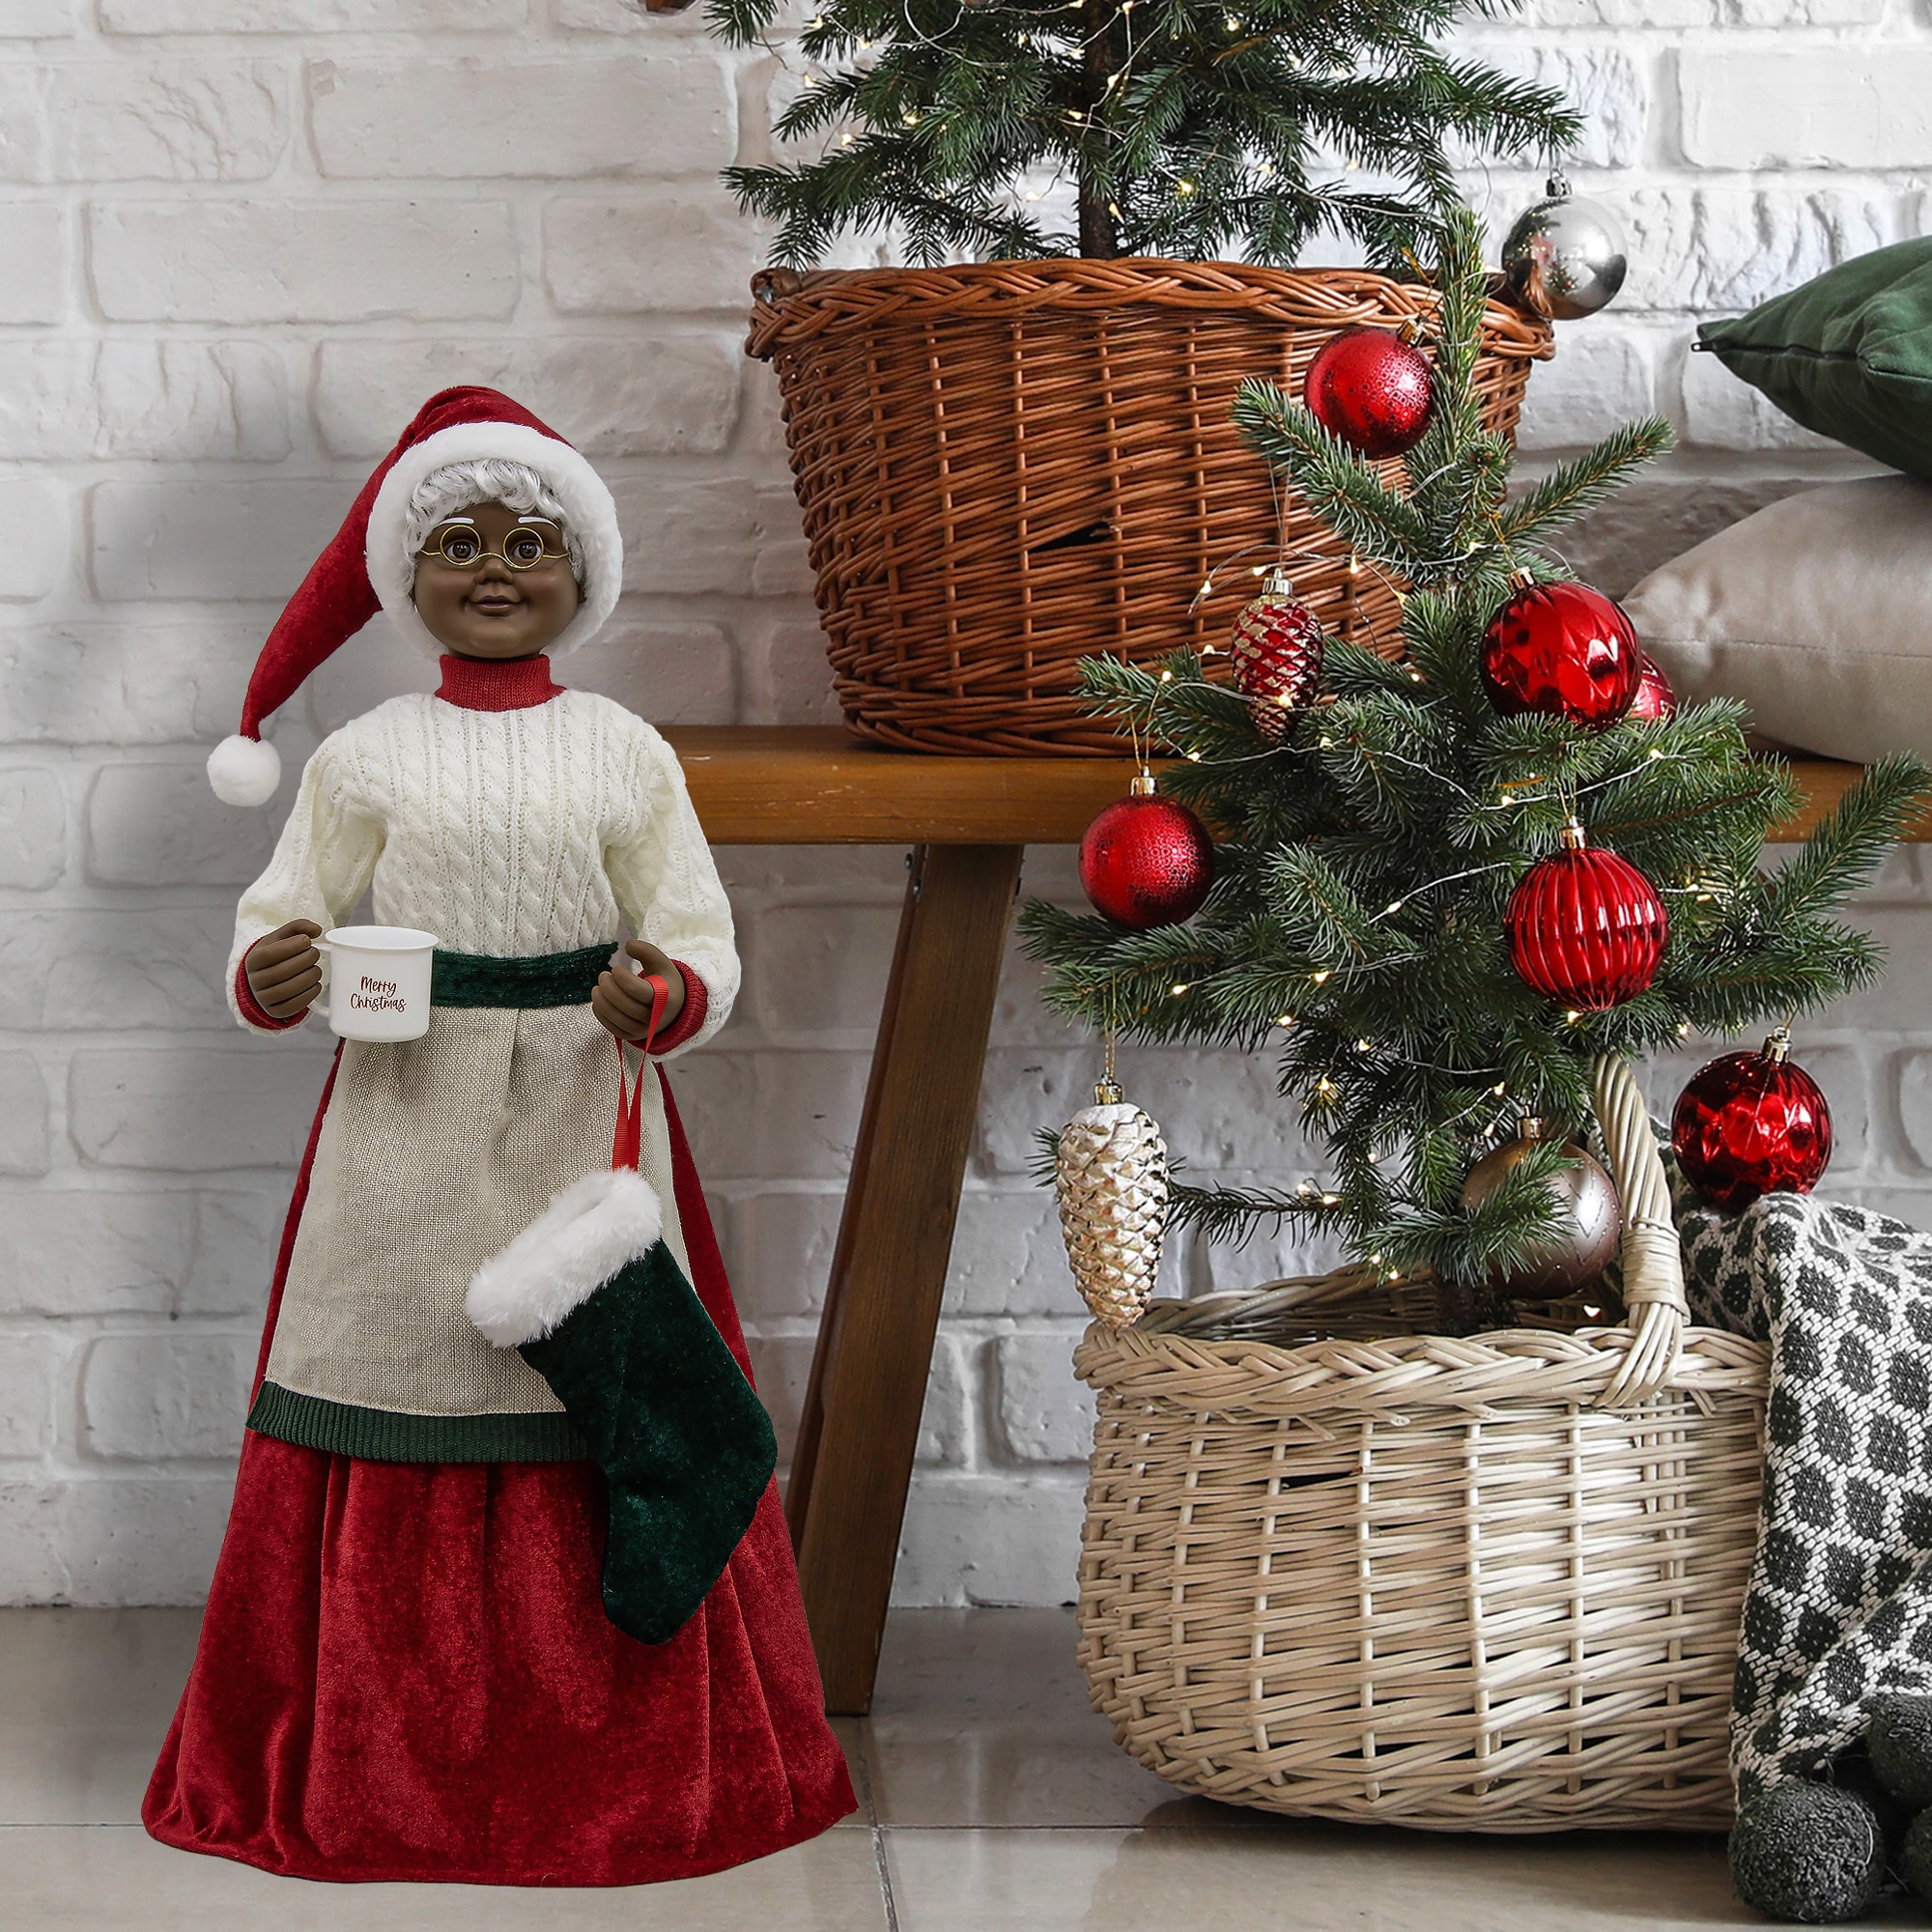 African American Mr And Mrs Santa Claus, Claus, from The Holiday Aisle®,  will fill your home, office, or shop with holiday cheer.